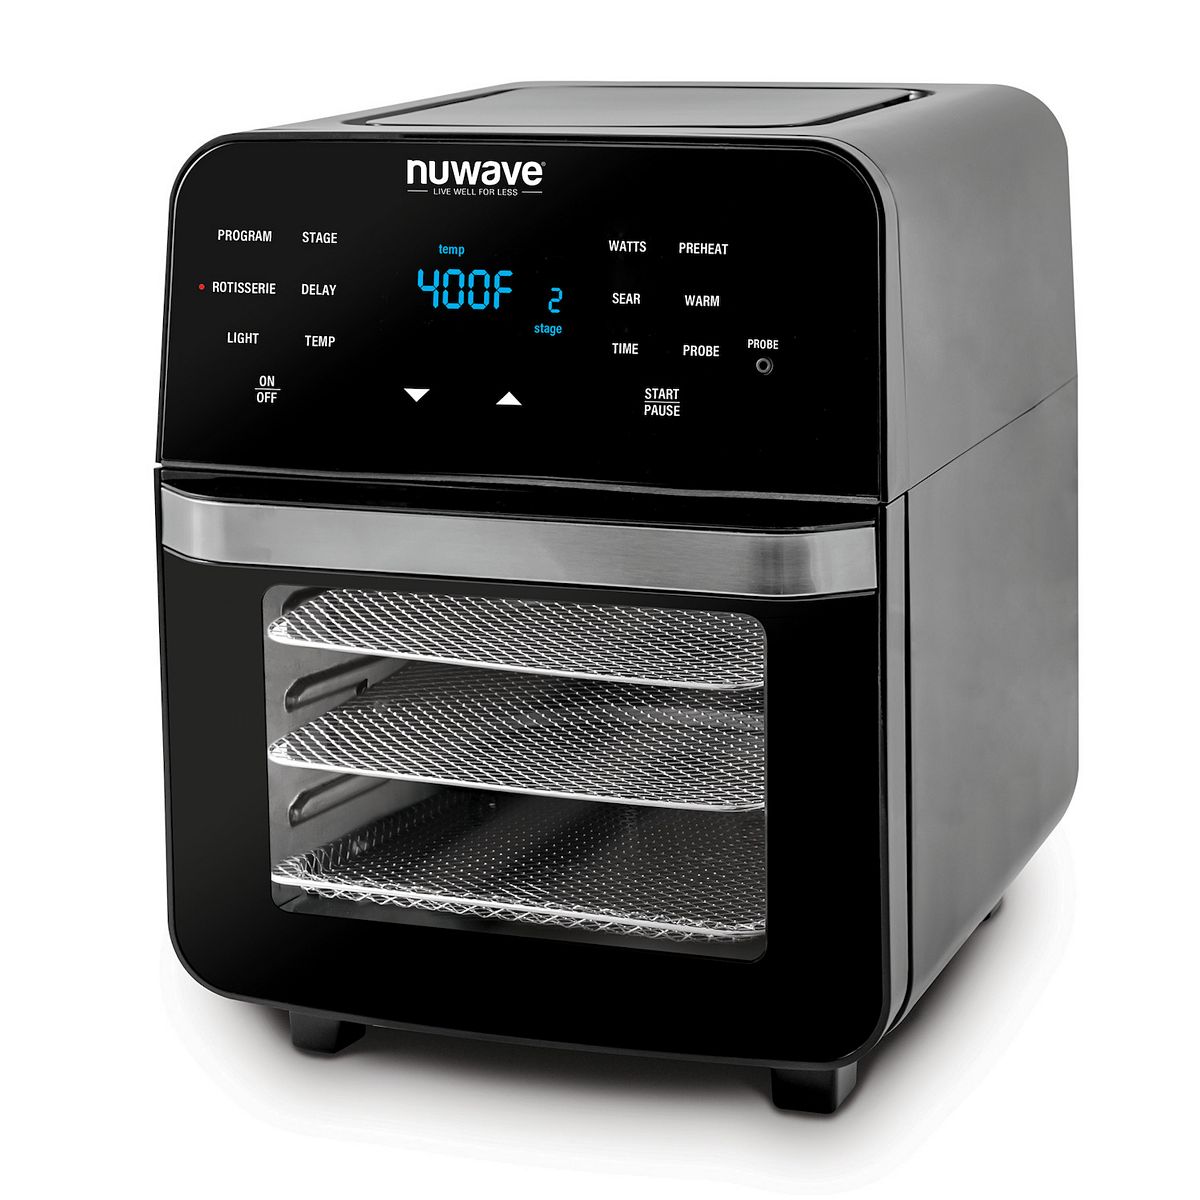 14-Qt NuWave Brio Digital Air Fryer Oven with Temperature Probe + $10 in Kohls Cash $81.59 + Free shipping